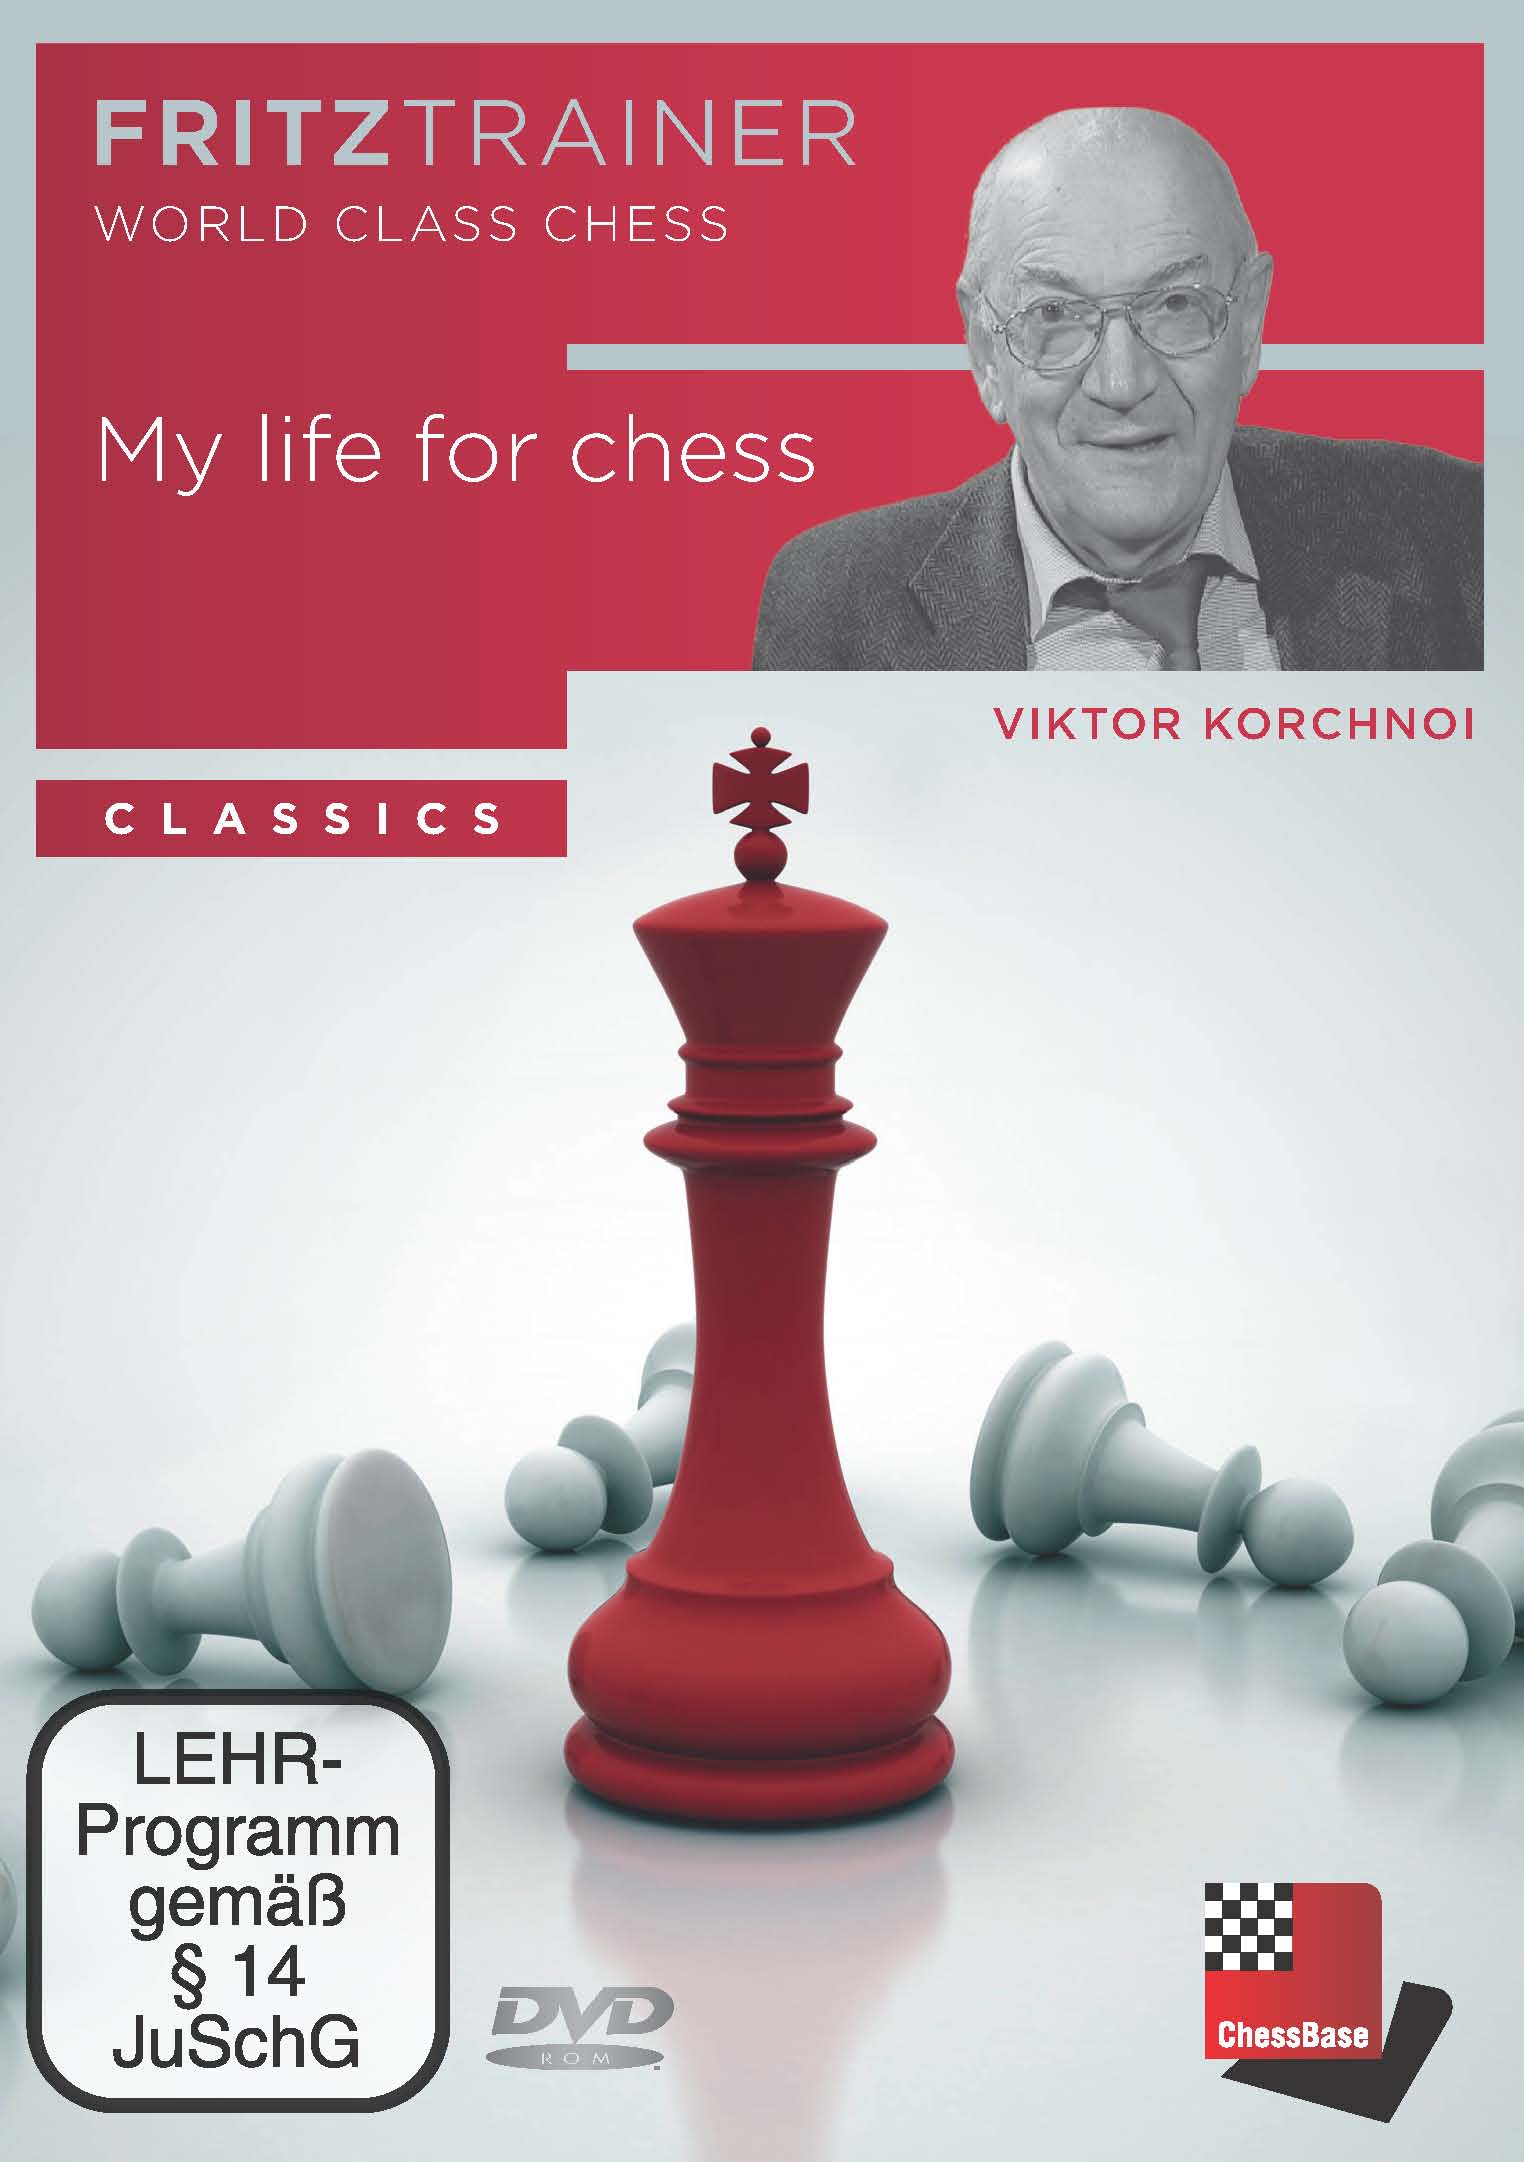 Korchnoi: My life for chess